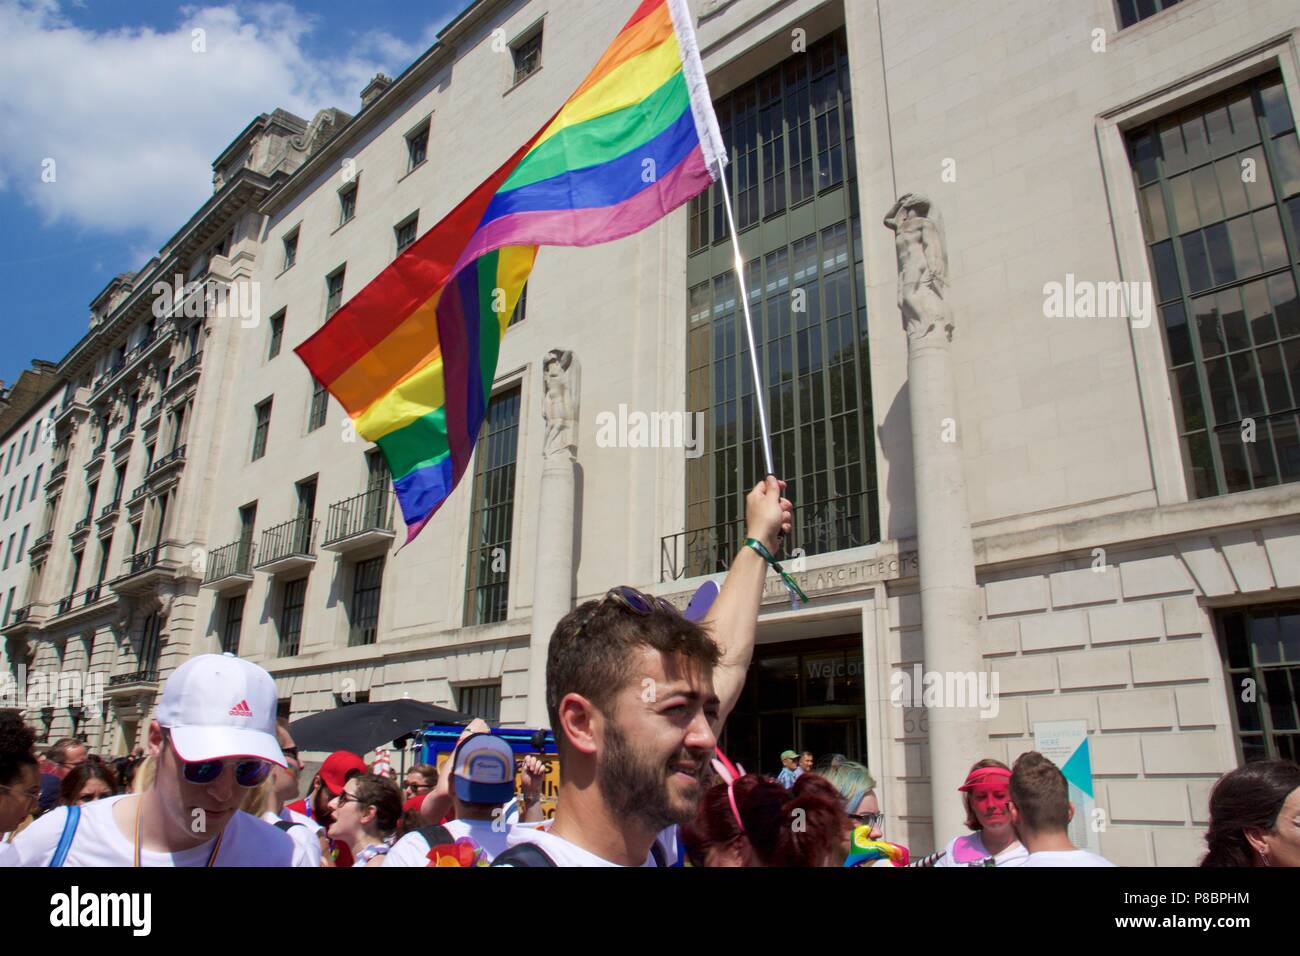 A man holding a rainbow flag in the air in the Pride in London 2018 Parade Stock Photo